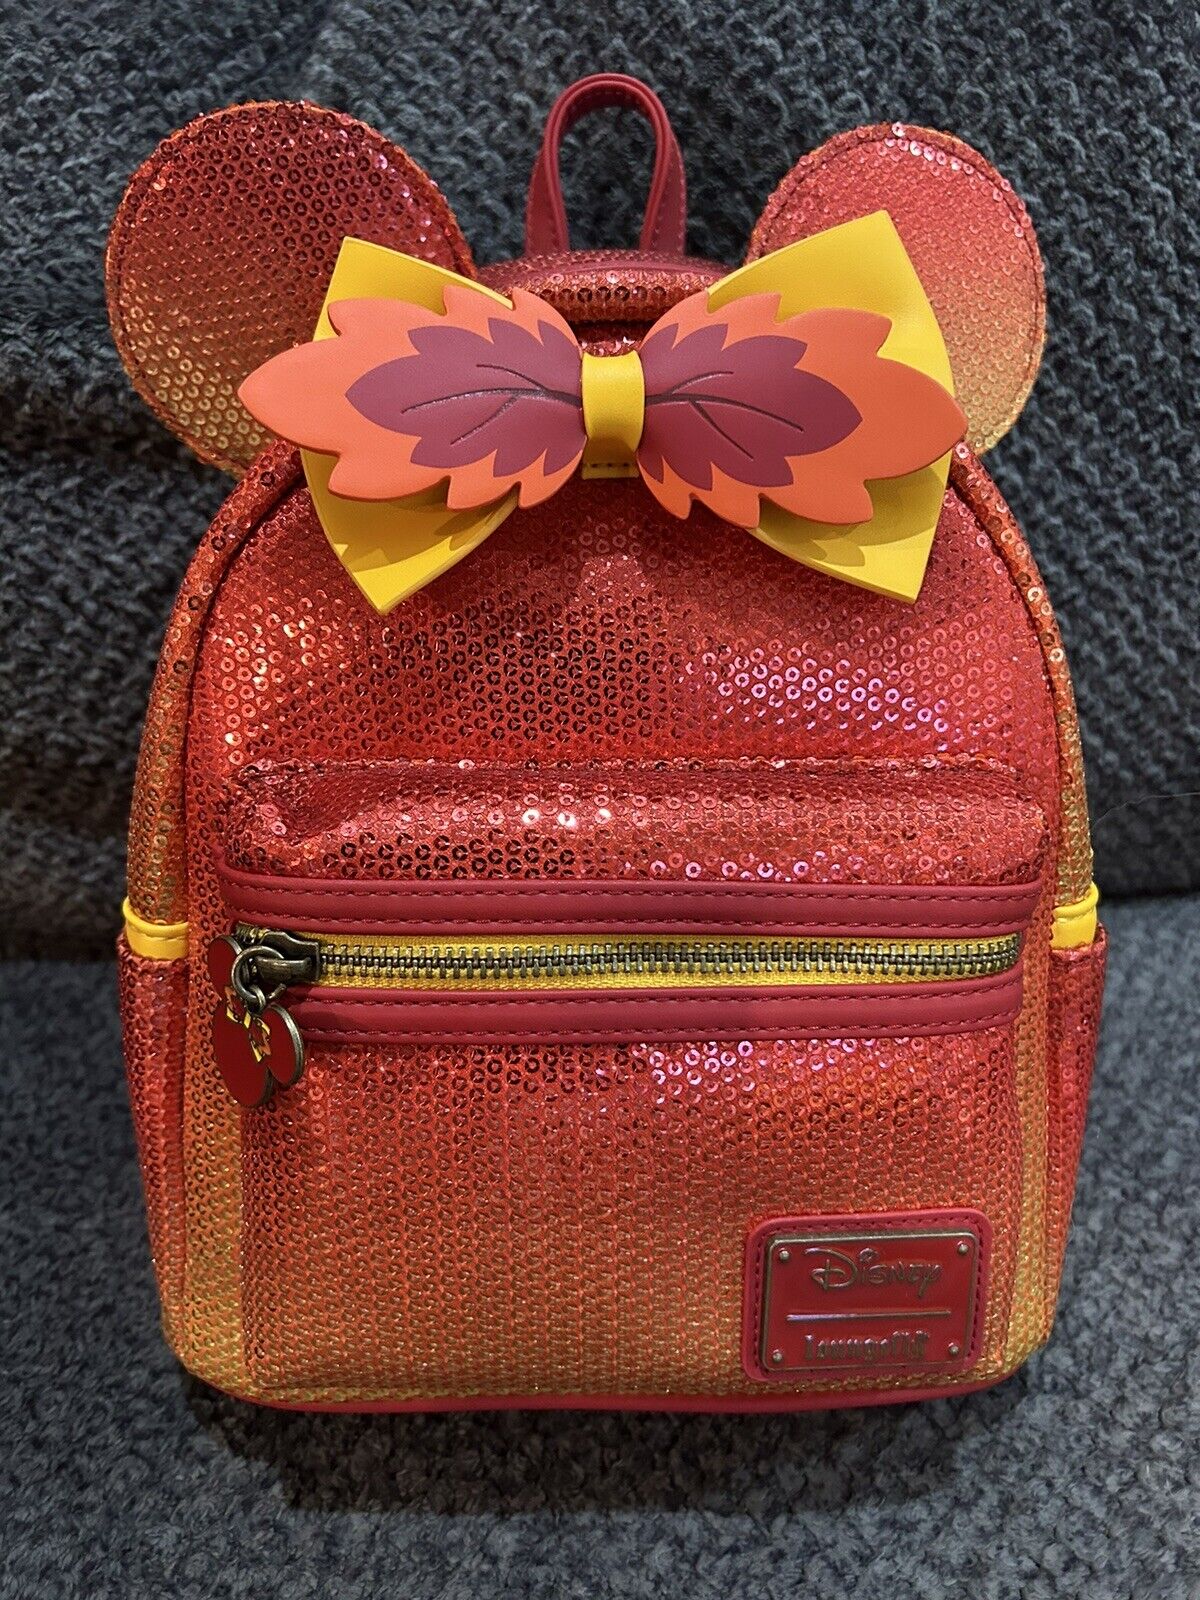 Disney Loungefly  Sequin Minnie Mouse Fall Ombre Mini Backpack. New